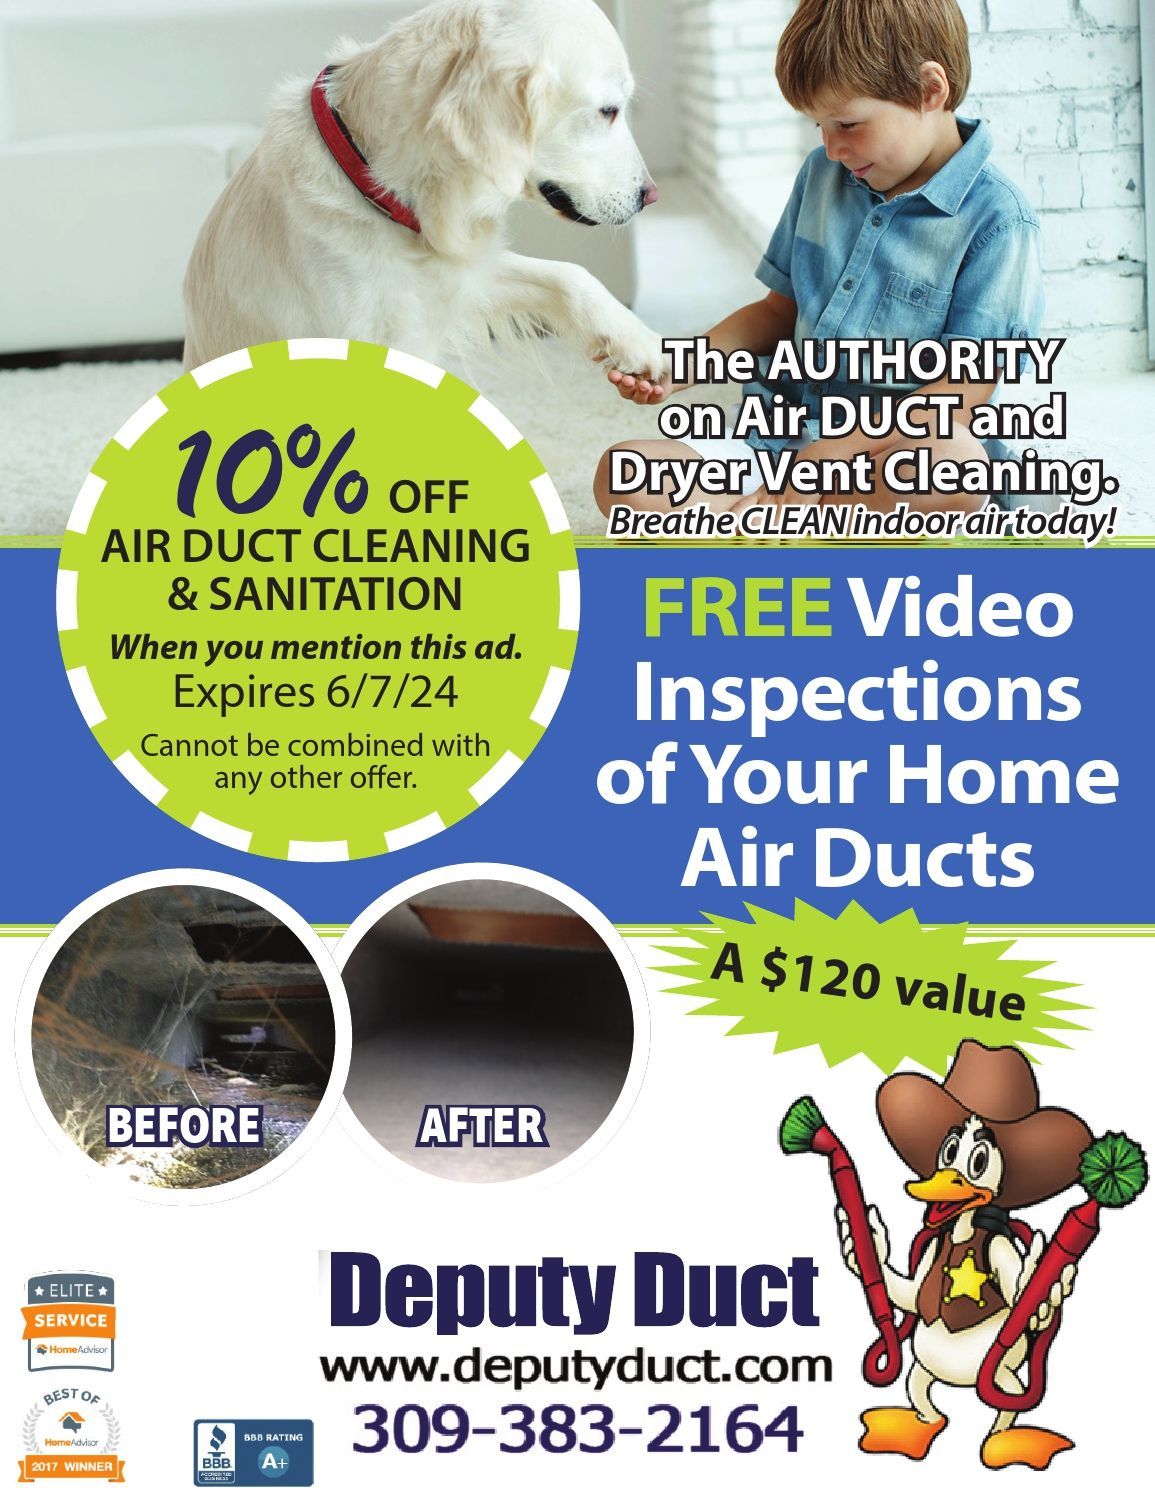 Deputy Duct air duct cleaning coupon, help with allergies, breath easy and dryer vent cleaning Germantown Hills, IL